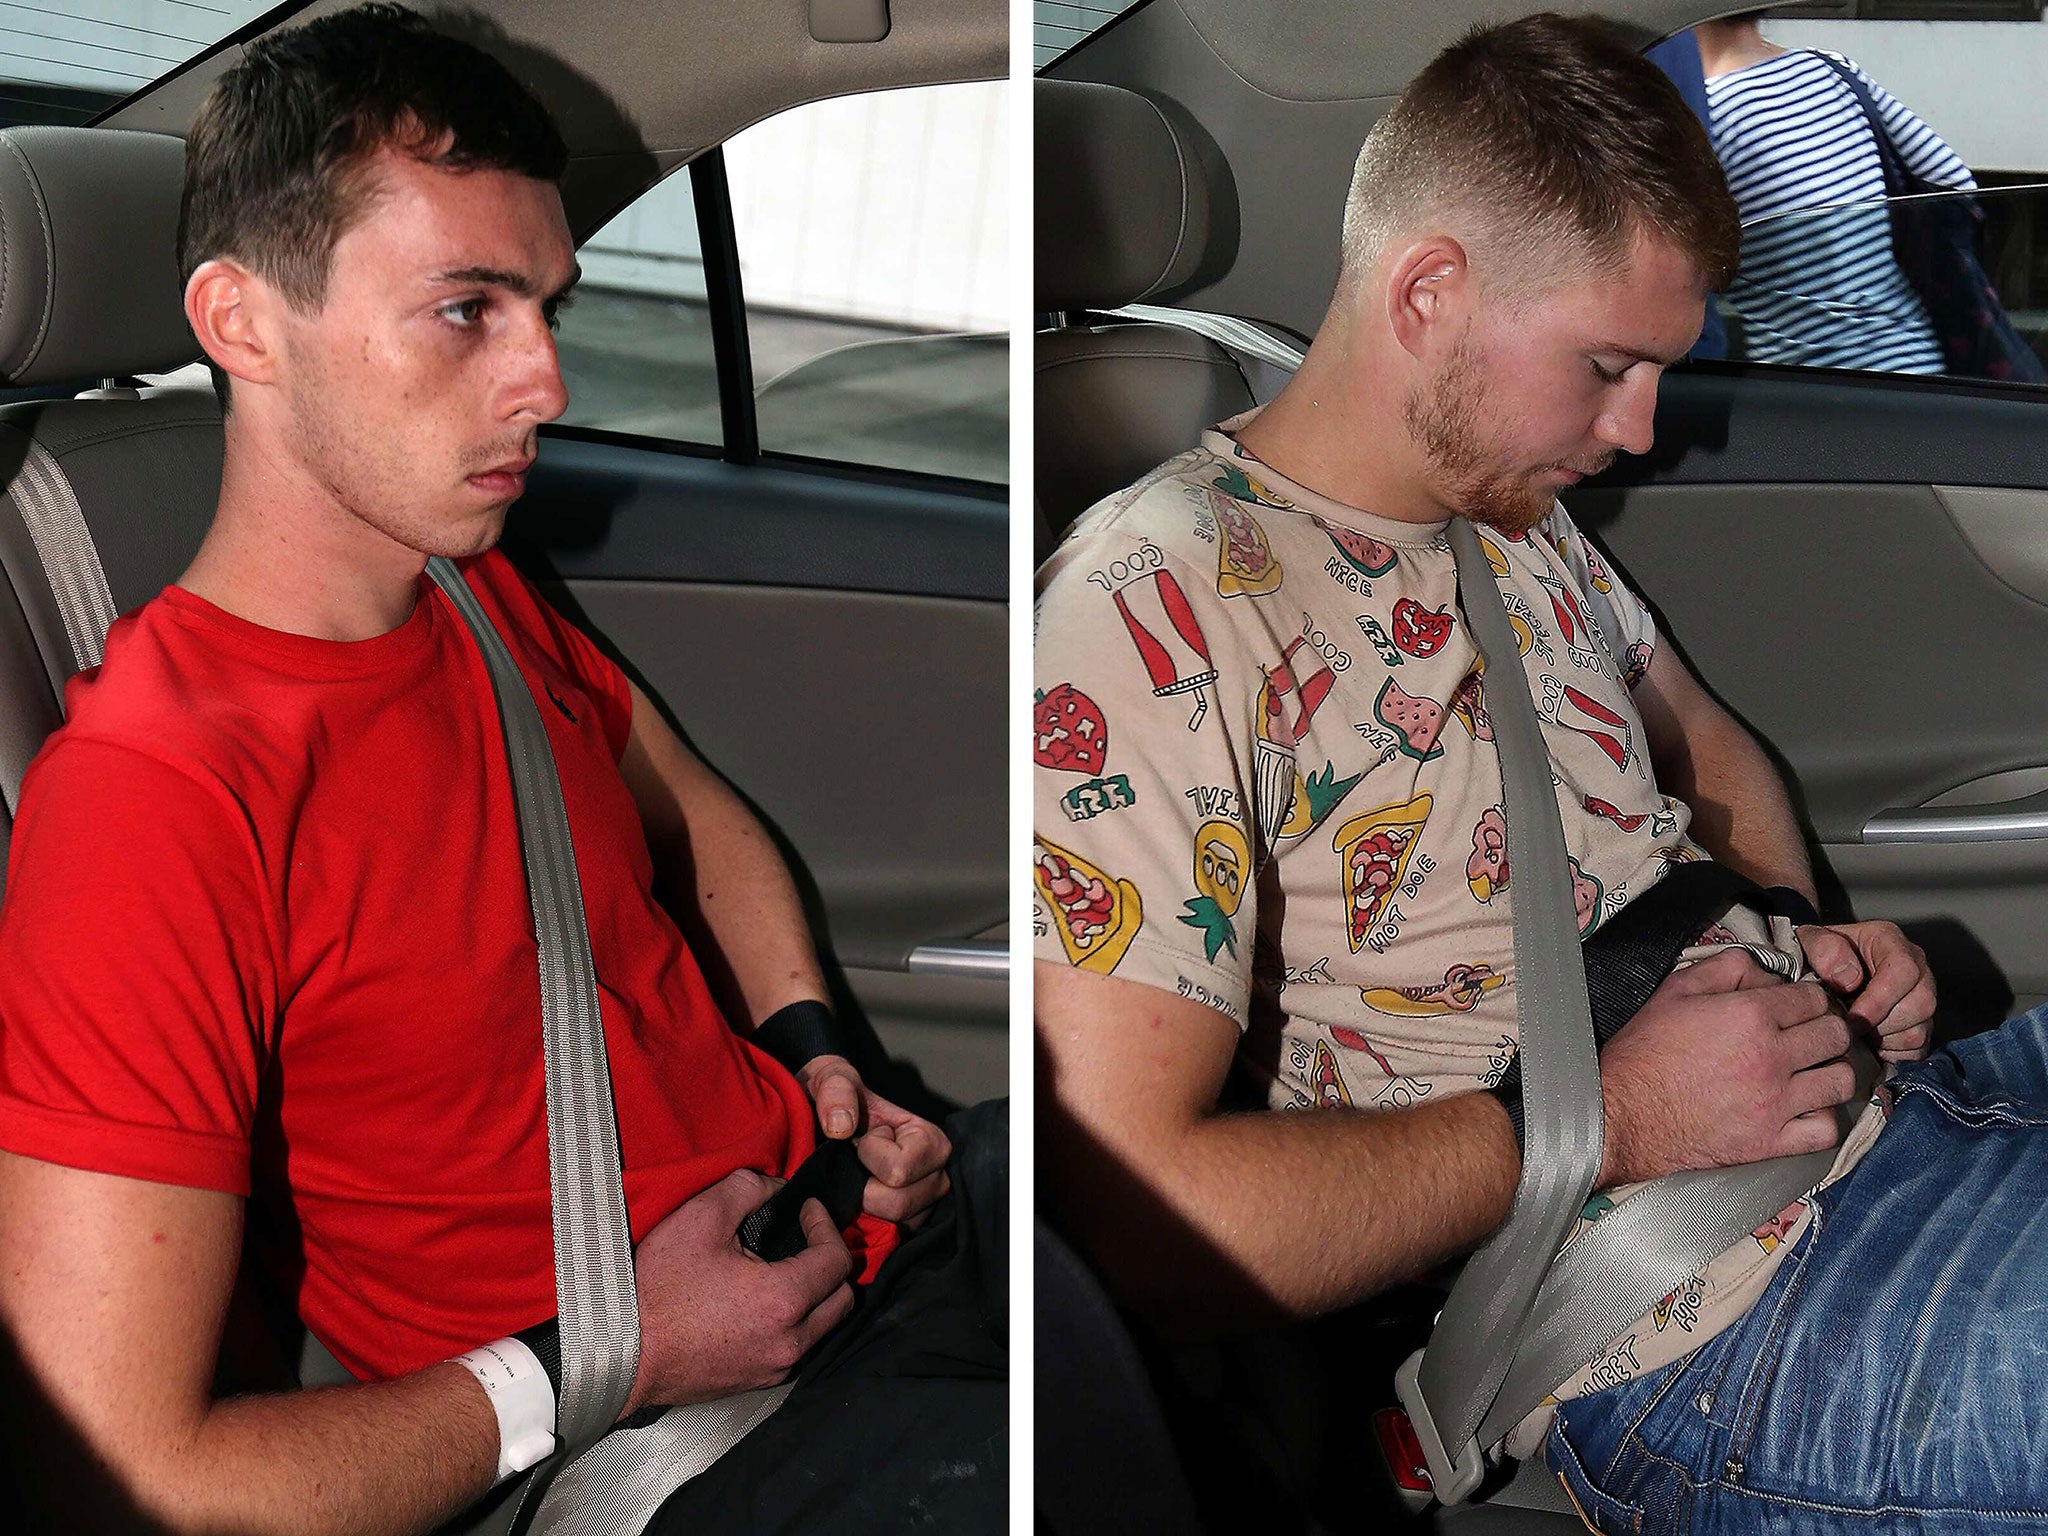 Andreas Von Knorre (L) and Elton Hinz, both charged for vandalising an SMRT train, arriving at the State Court in Singapore 22 November, 2014